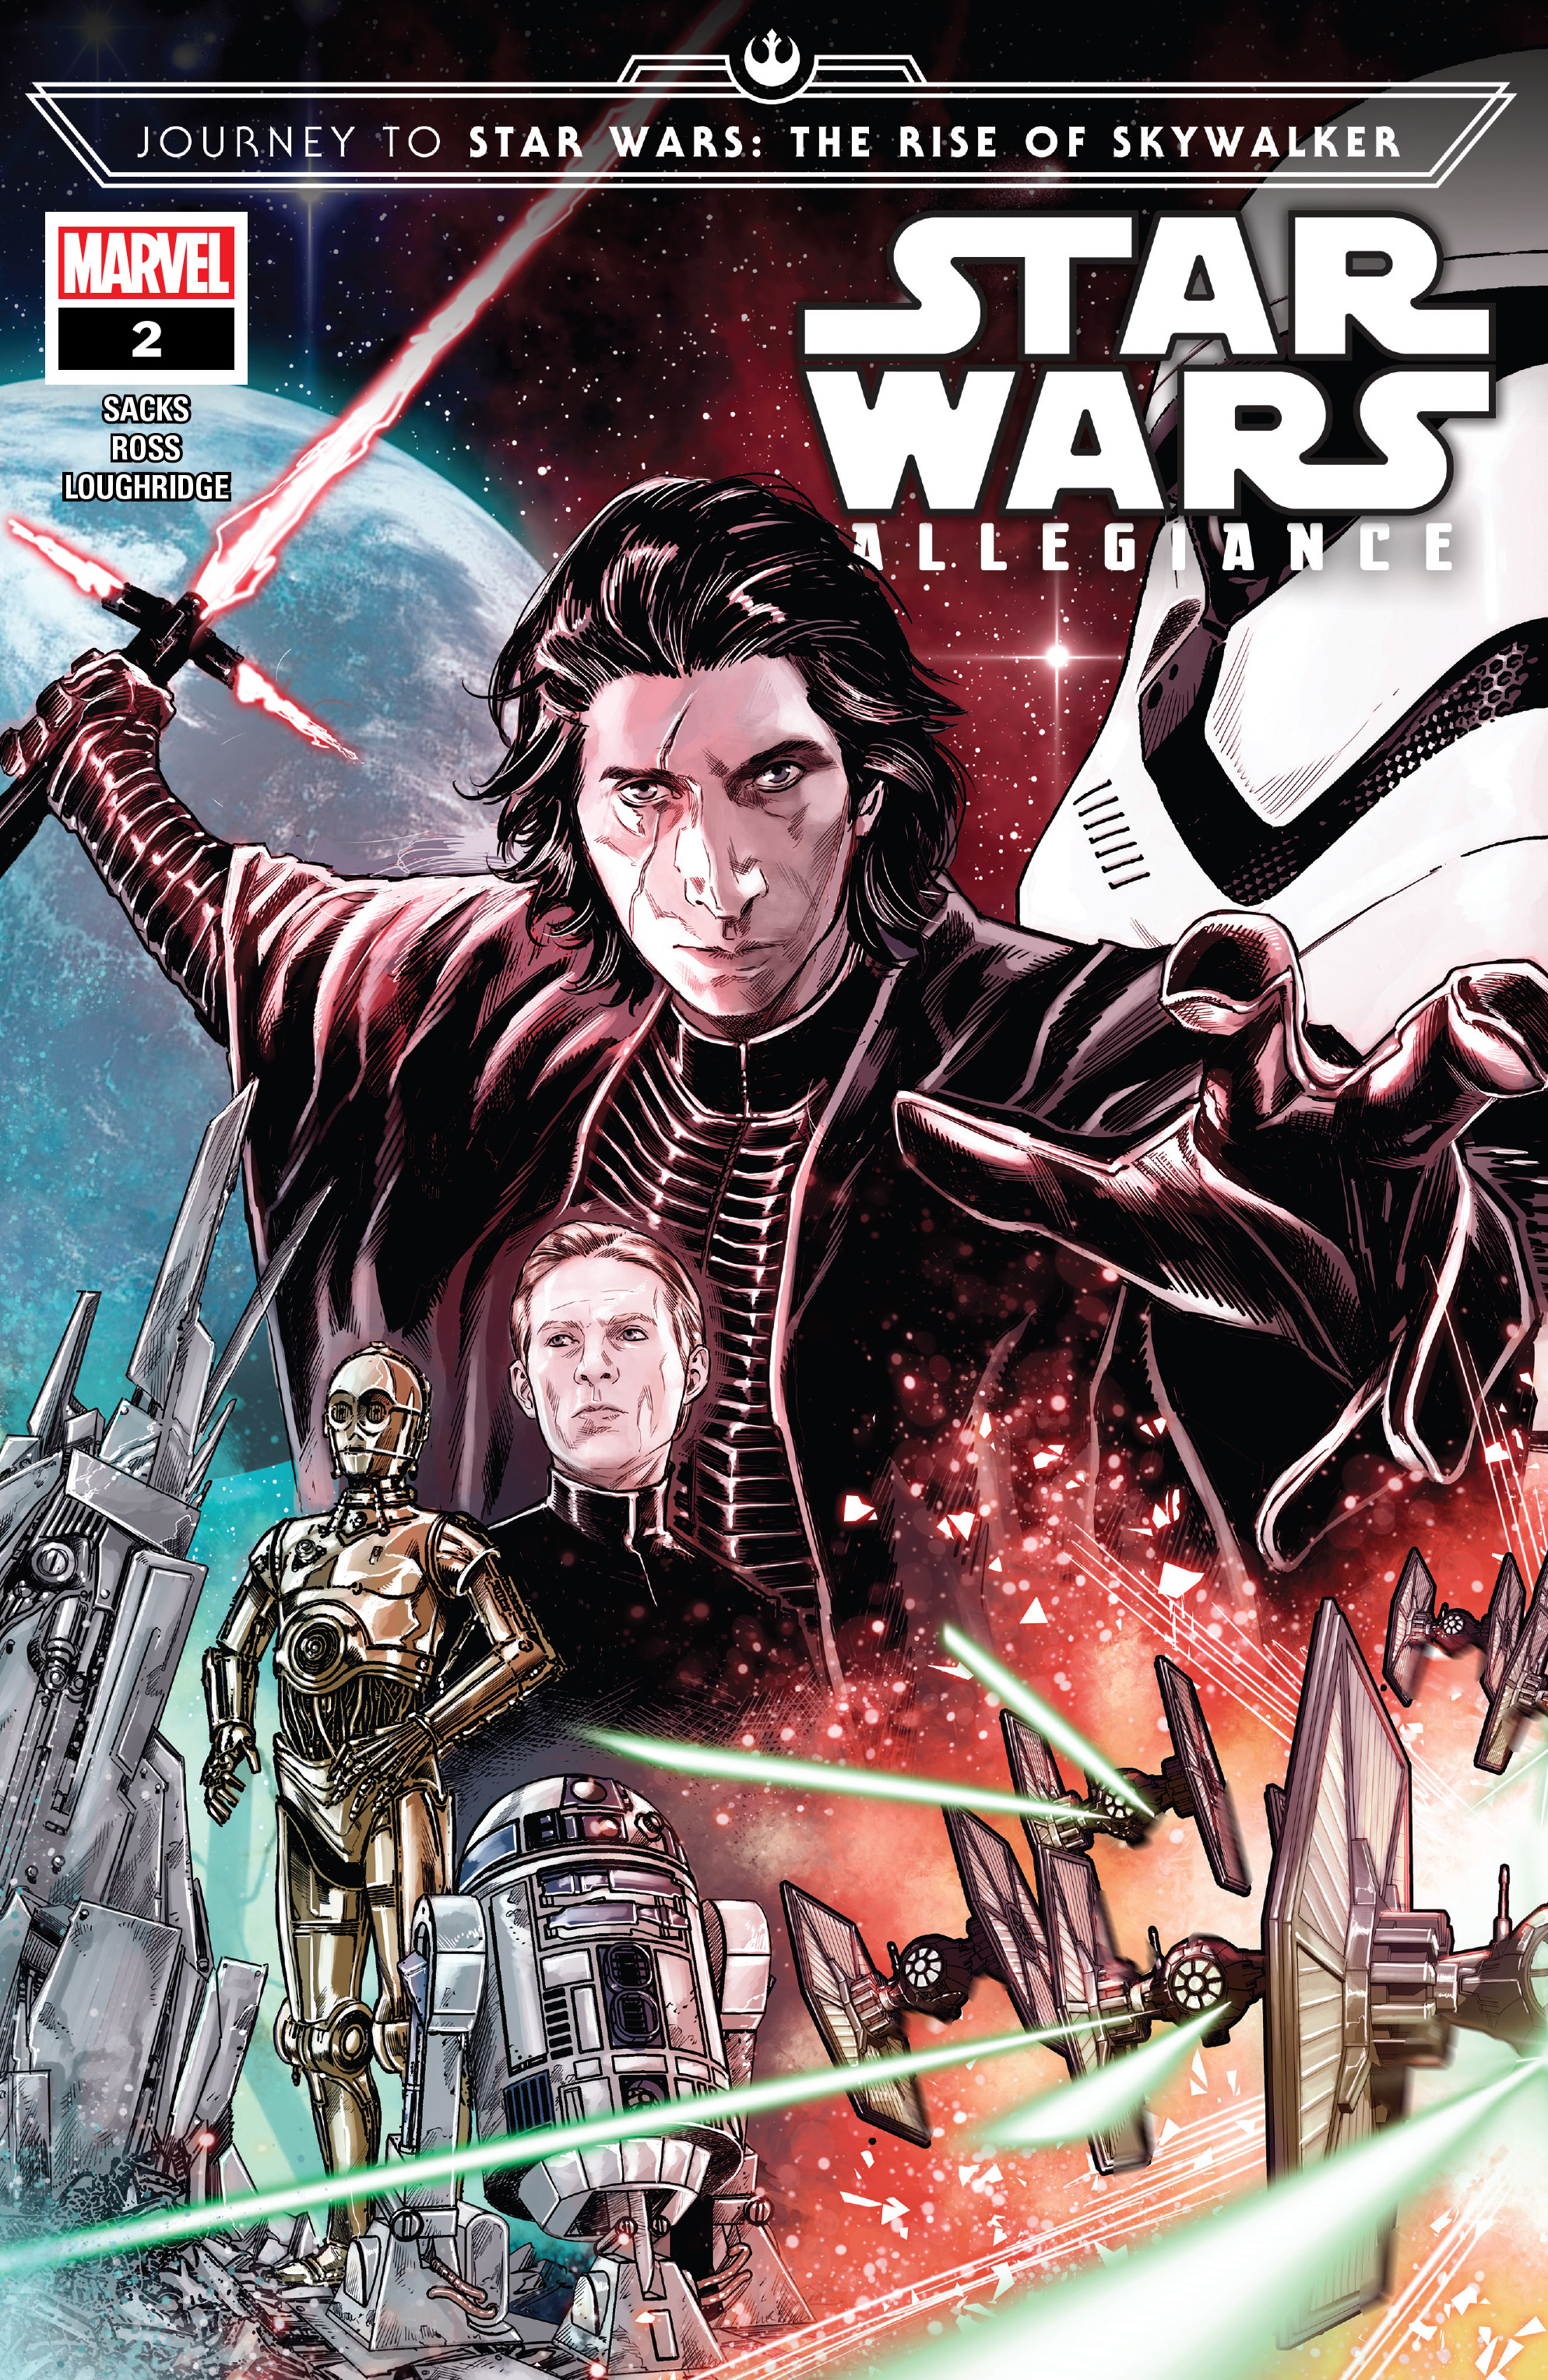 Read online Journey to Star Wars: The Rise Of Skywalker - Allegiance comic -  Issue #2 - 1